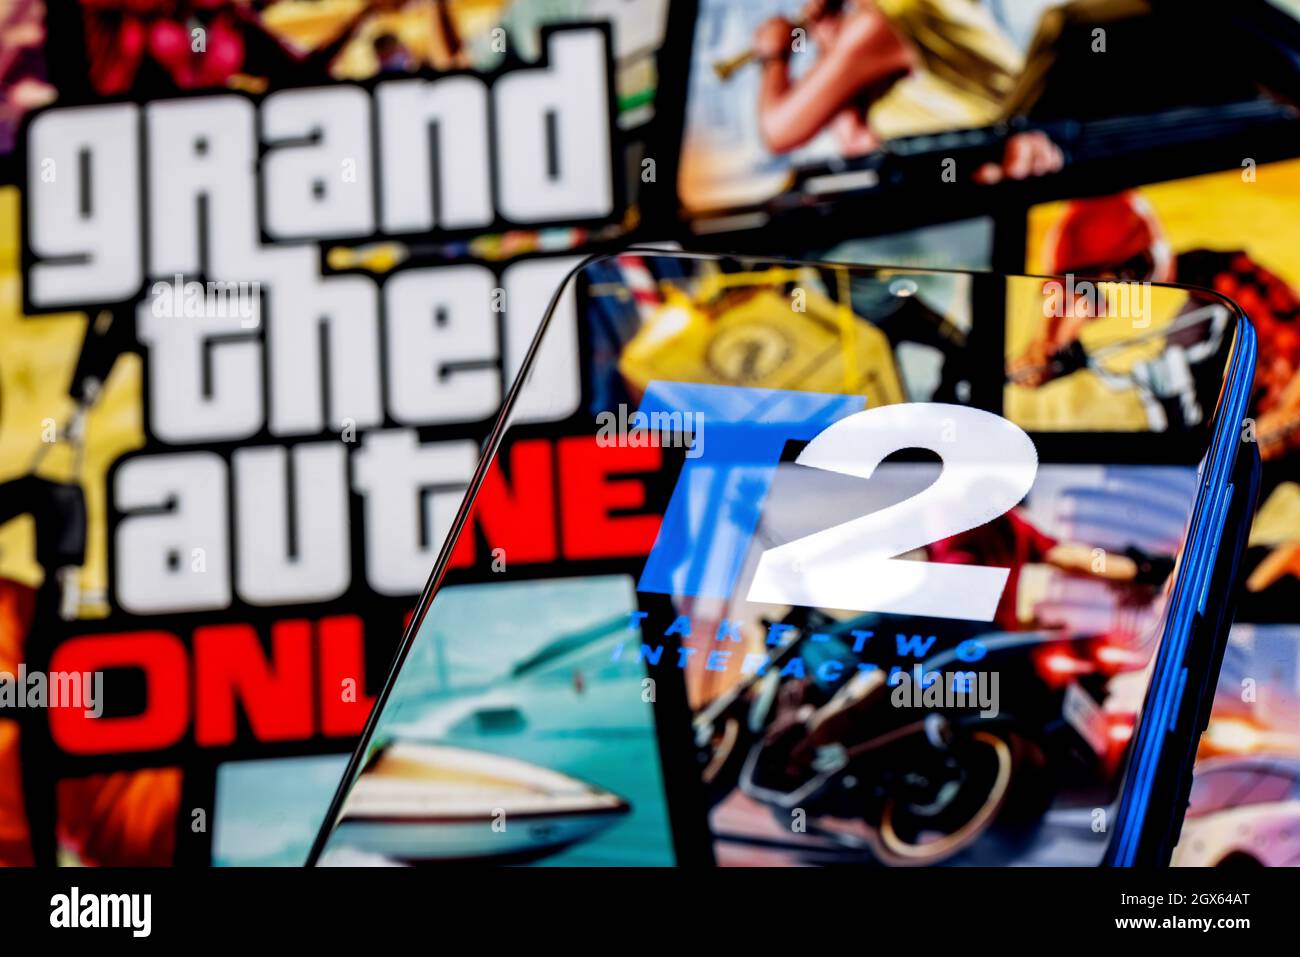 Take-Two logo on smartphone screen. A frame from the GTA game on the background. Stock Photo